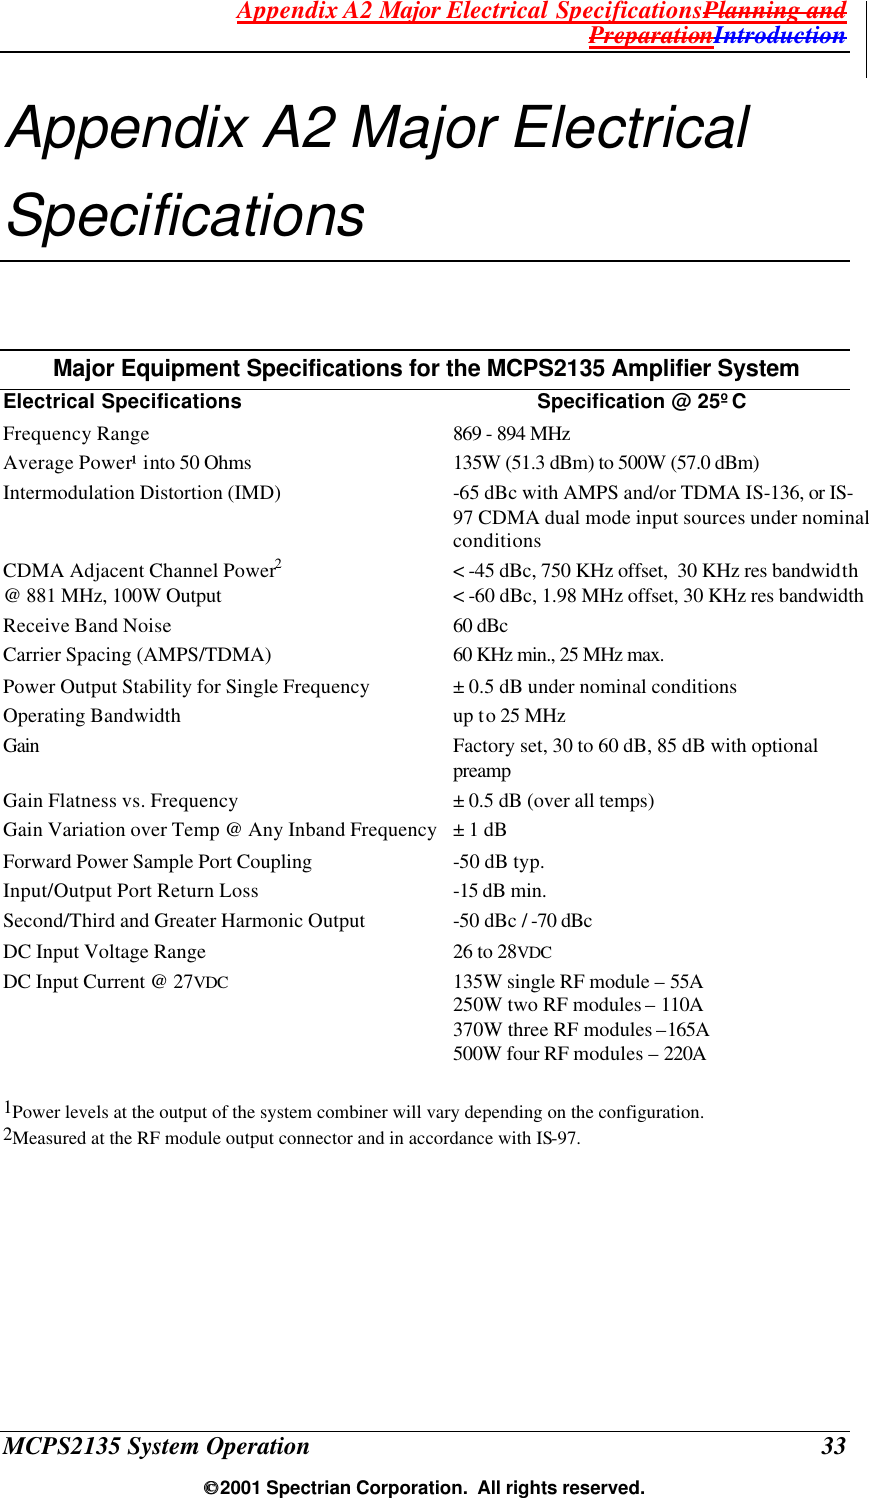 Appendix A2 Major Electrical SpecificationsPlanning and PreparationIntroduction MCPS2135 System Operation  33  2001 Spectrian Corporation.  All rights reserved. Appendix A2 Major Electrical Specifications Major Equipment Specifications for the MCPS2135 Amplifier System Electrical Specifications Specification @ 25ºC Frequency Range 869 - 894 MHz Average Power¹ into 50 Ohms  135W (51.3 dBm) to 500W (57.0 dBm) Intermodulation Distortion (IMD) -65 dBc with AMPS and/or TDMA IS-136, or IS-97 CDMA dual mode input sources under nominal conditions CDMA Adjacent Channel Power2 &lt; -45 dBc, 750 KHz offset,  30 KHz res bandwidth @ 881 MHz, 100W Output &lt; -60 dBc, 1.98 MHz offset, 30 KHz res bandwidth Receive Band Noise 60 dBc Carrier Spacing (AMPS/TDMA) 60 KHz min., 25 MHz max. Power Output Stability for Single Frequency ± 0.5 dB under nominal conditions Operating Bandwidth up to 25 MHz Gain Factory set, 30 to 60 dB, 85 dB with optional preamp  Gain Flatness vs. Frequency ± 0.5 dB (over all temps) Gain Variation over Temp @ Any Inband Frequency ± 1 dB Forward Power Sample Port Coupling -50 dB typ. Input/Output Port Return Loss -15 dB min. Second/Third and Greater Harmonic Output -50 dBc / -70 dBc DC Input Voltage Range 26 to 28VDC DC Input Current @ 27VDC  135W single RF module – 55A 250W two RF modules – 110A 370W three RF modules –165A 500W four RF modules – 220A  1Power levels at the output of the system combiner will vary depending on the configuration. 2Measured at the RF module output connector and in accordance with IS-97.    